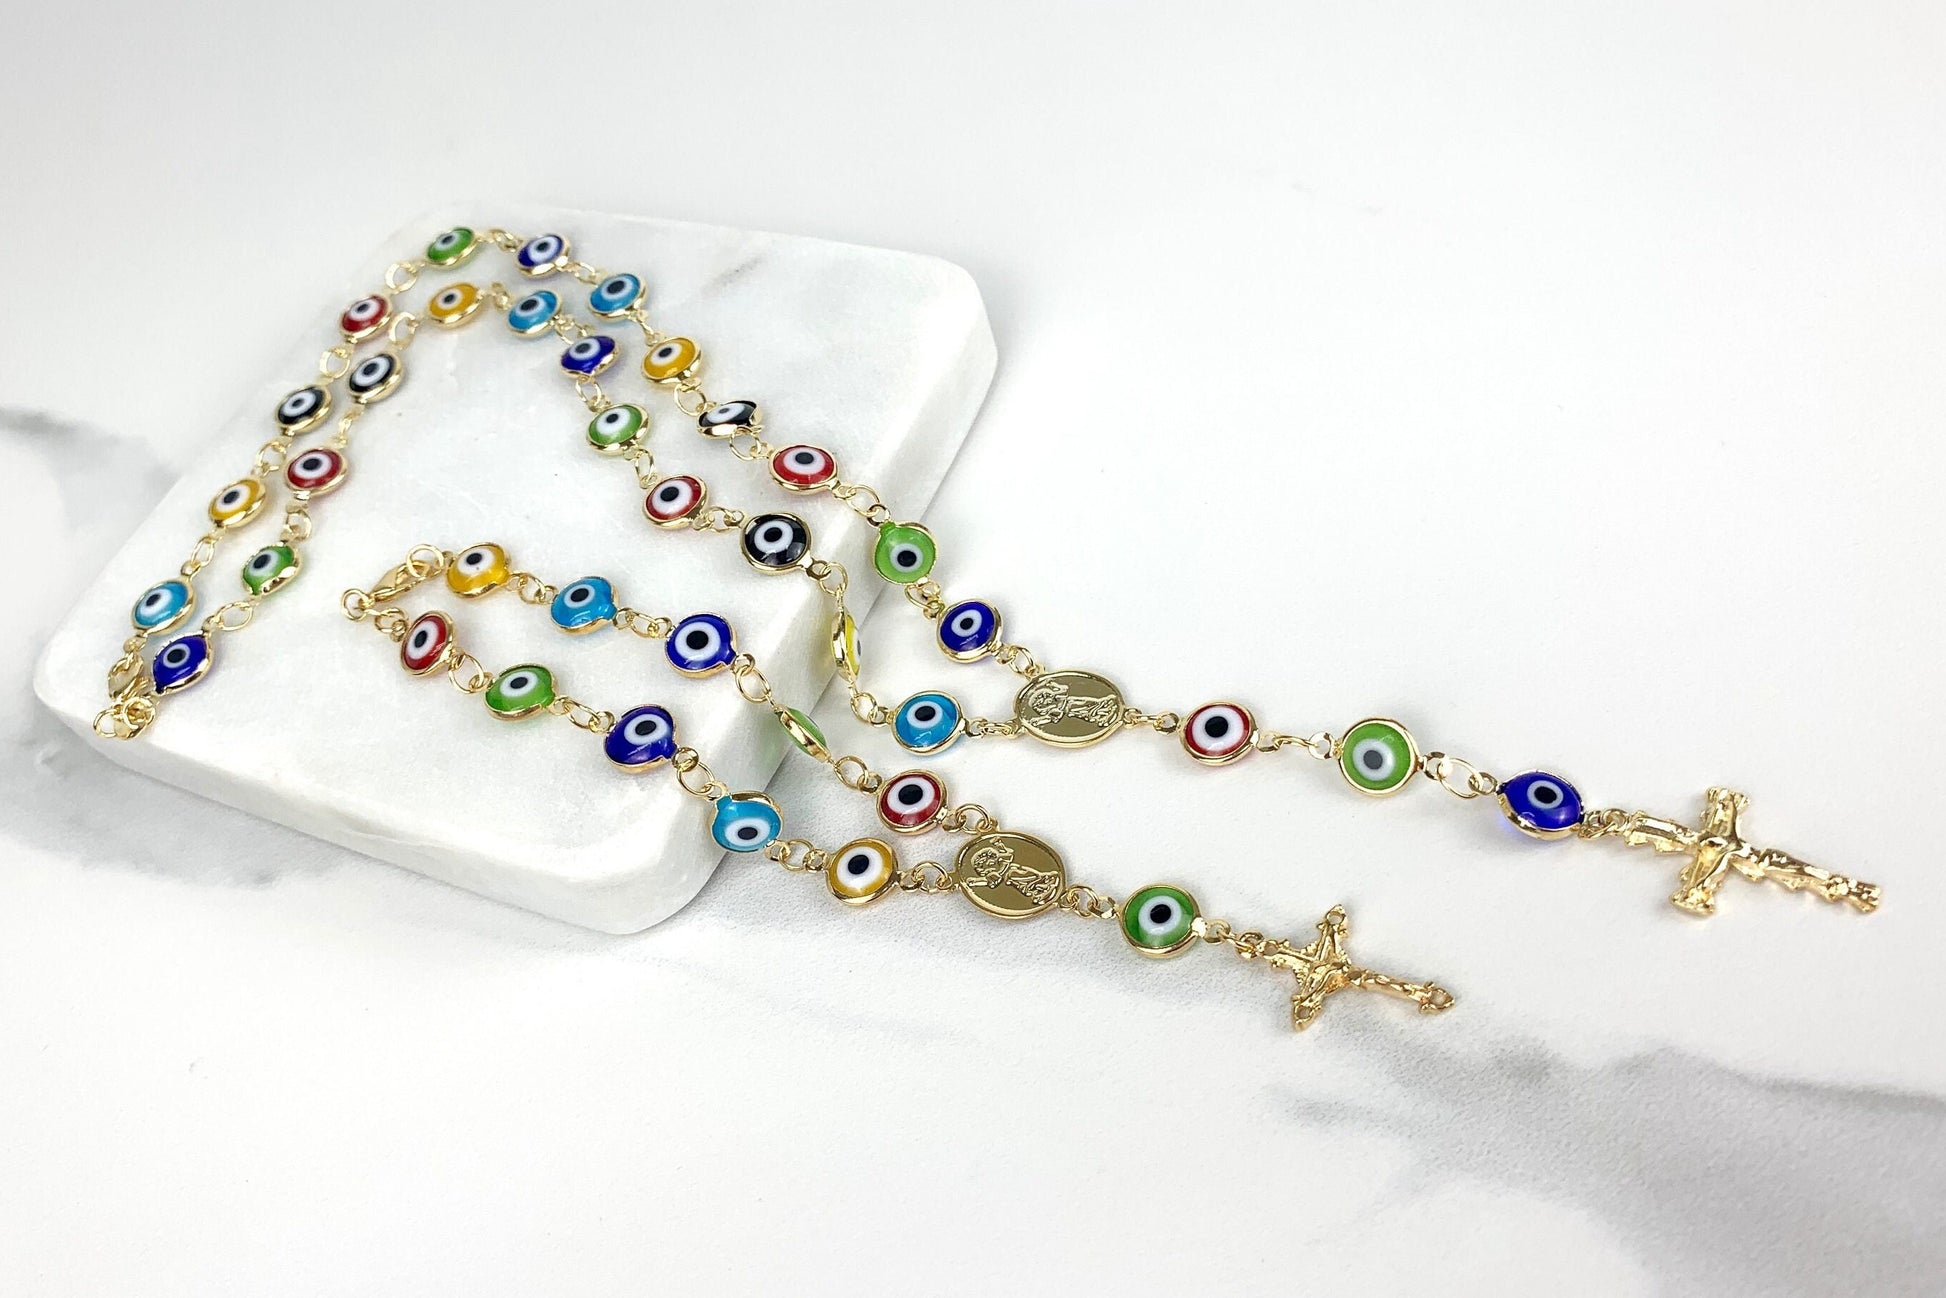 18k Gold Filled Colorful Colored Greek Evil Eye with Divine Child Rosary or Bracelet, Religious & Protection Jewelry, Wholesale Jewelry